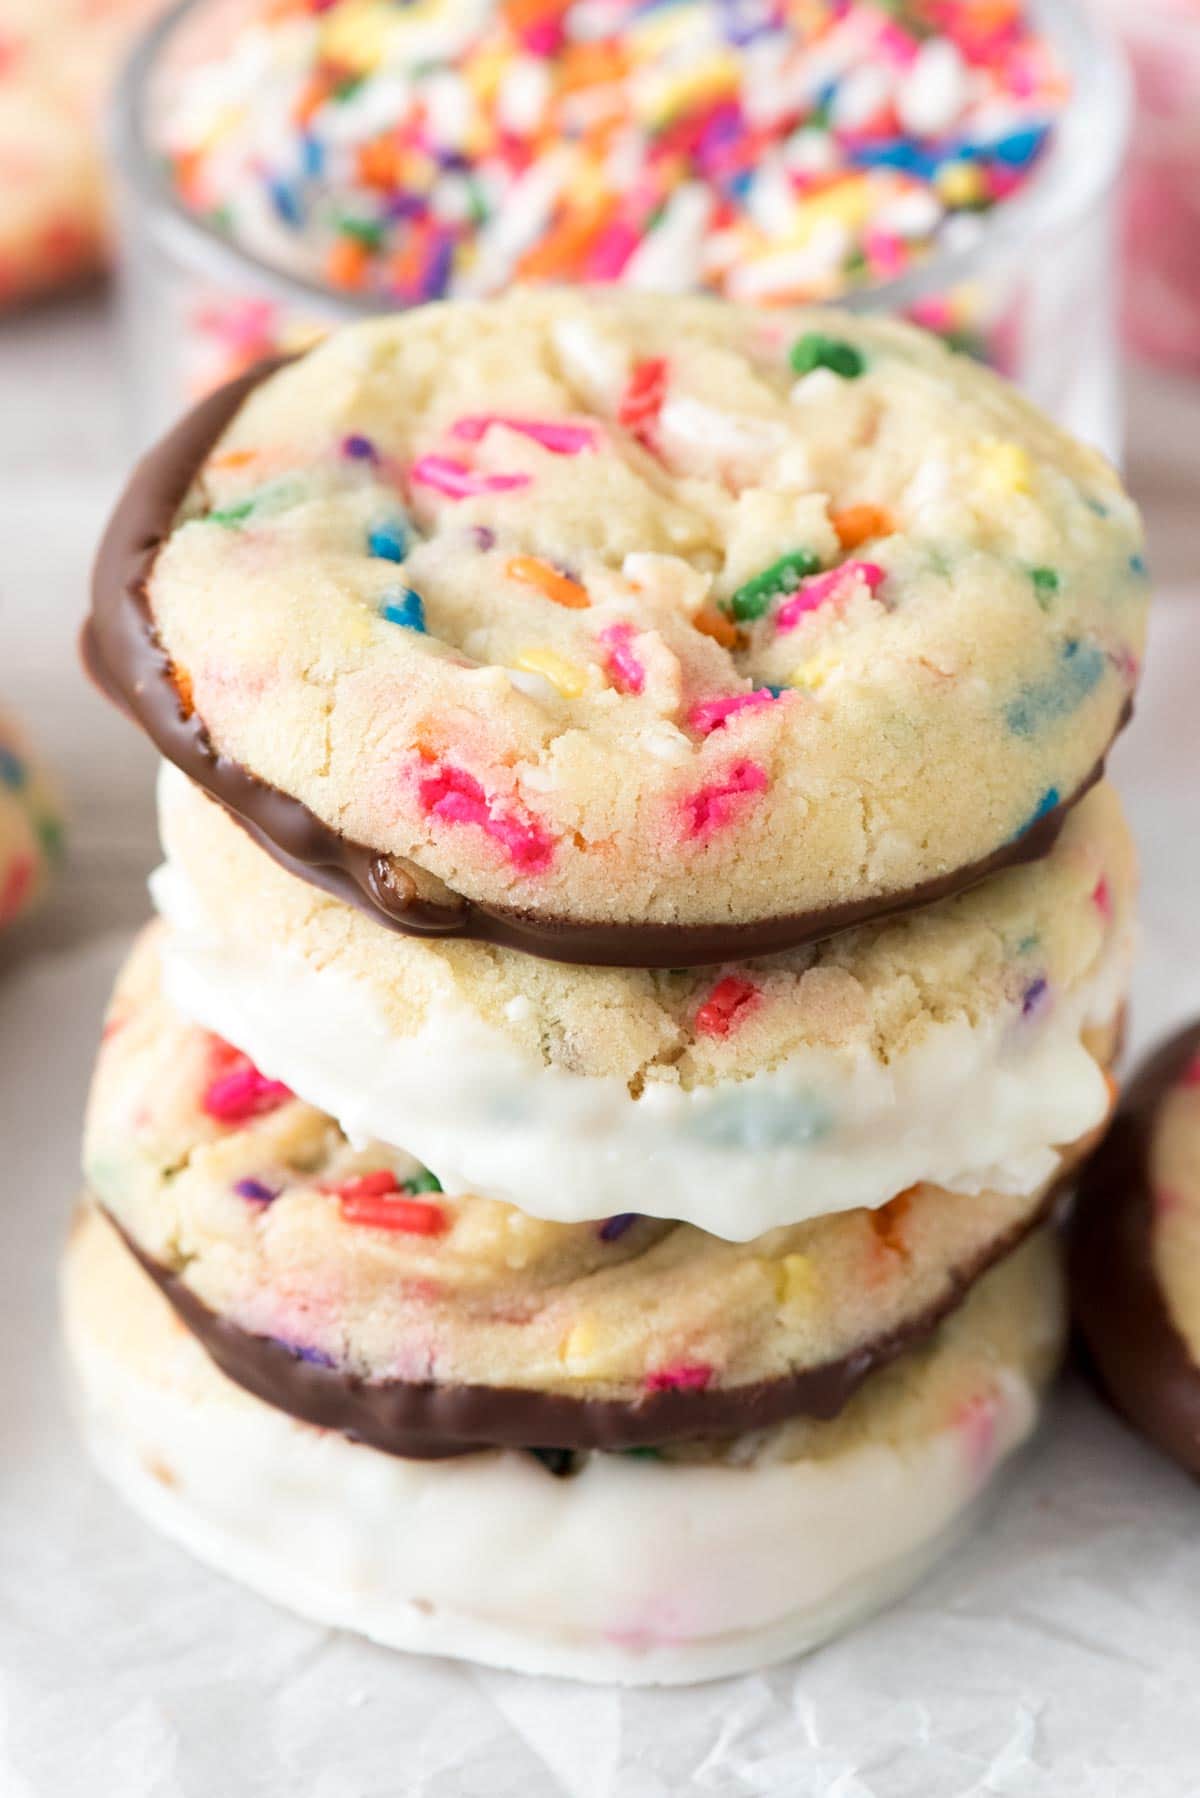 Sprinkle Cookies - this easy sugar cookie recipe is full of sprinkles! I love dipping the bottoms in chocolate for a sweet treat. EVERYONE loves these cookies!